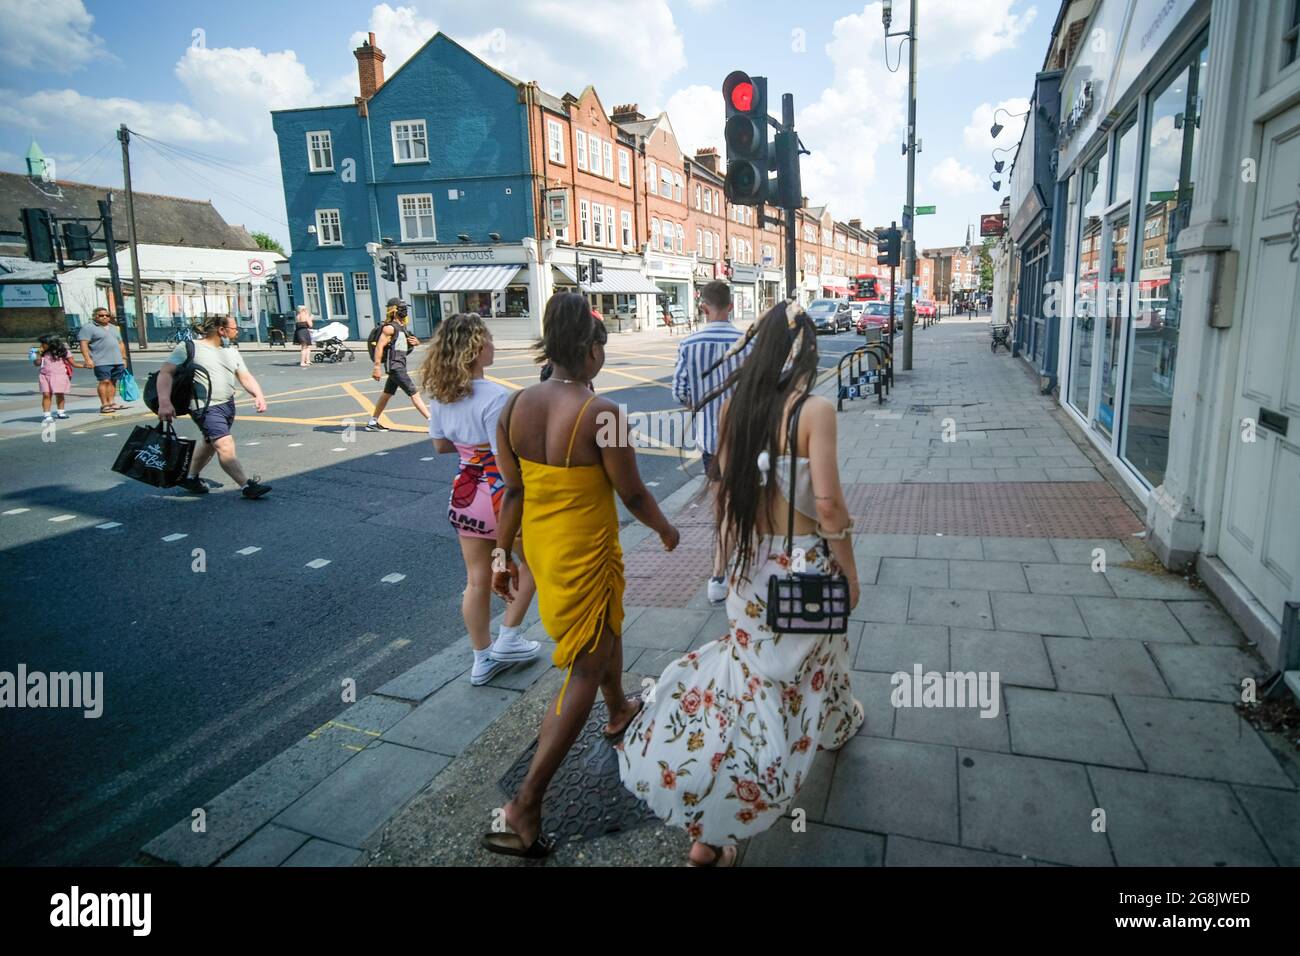 London- July 2021: Garratt Lane in Earlsfield, a high street of shops and food outlets in South West London Stock Photo